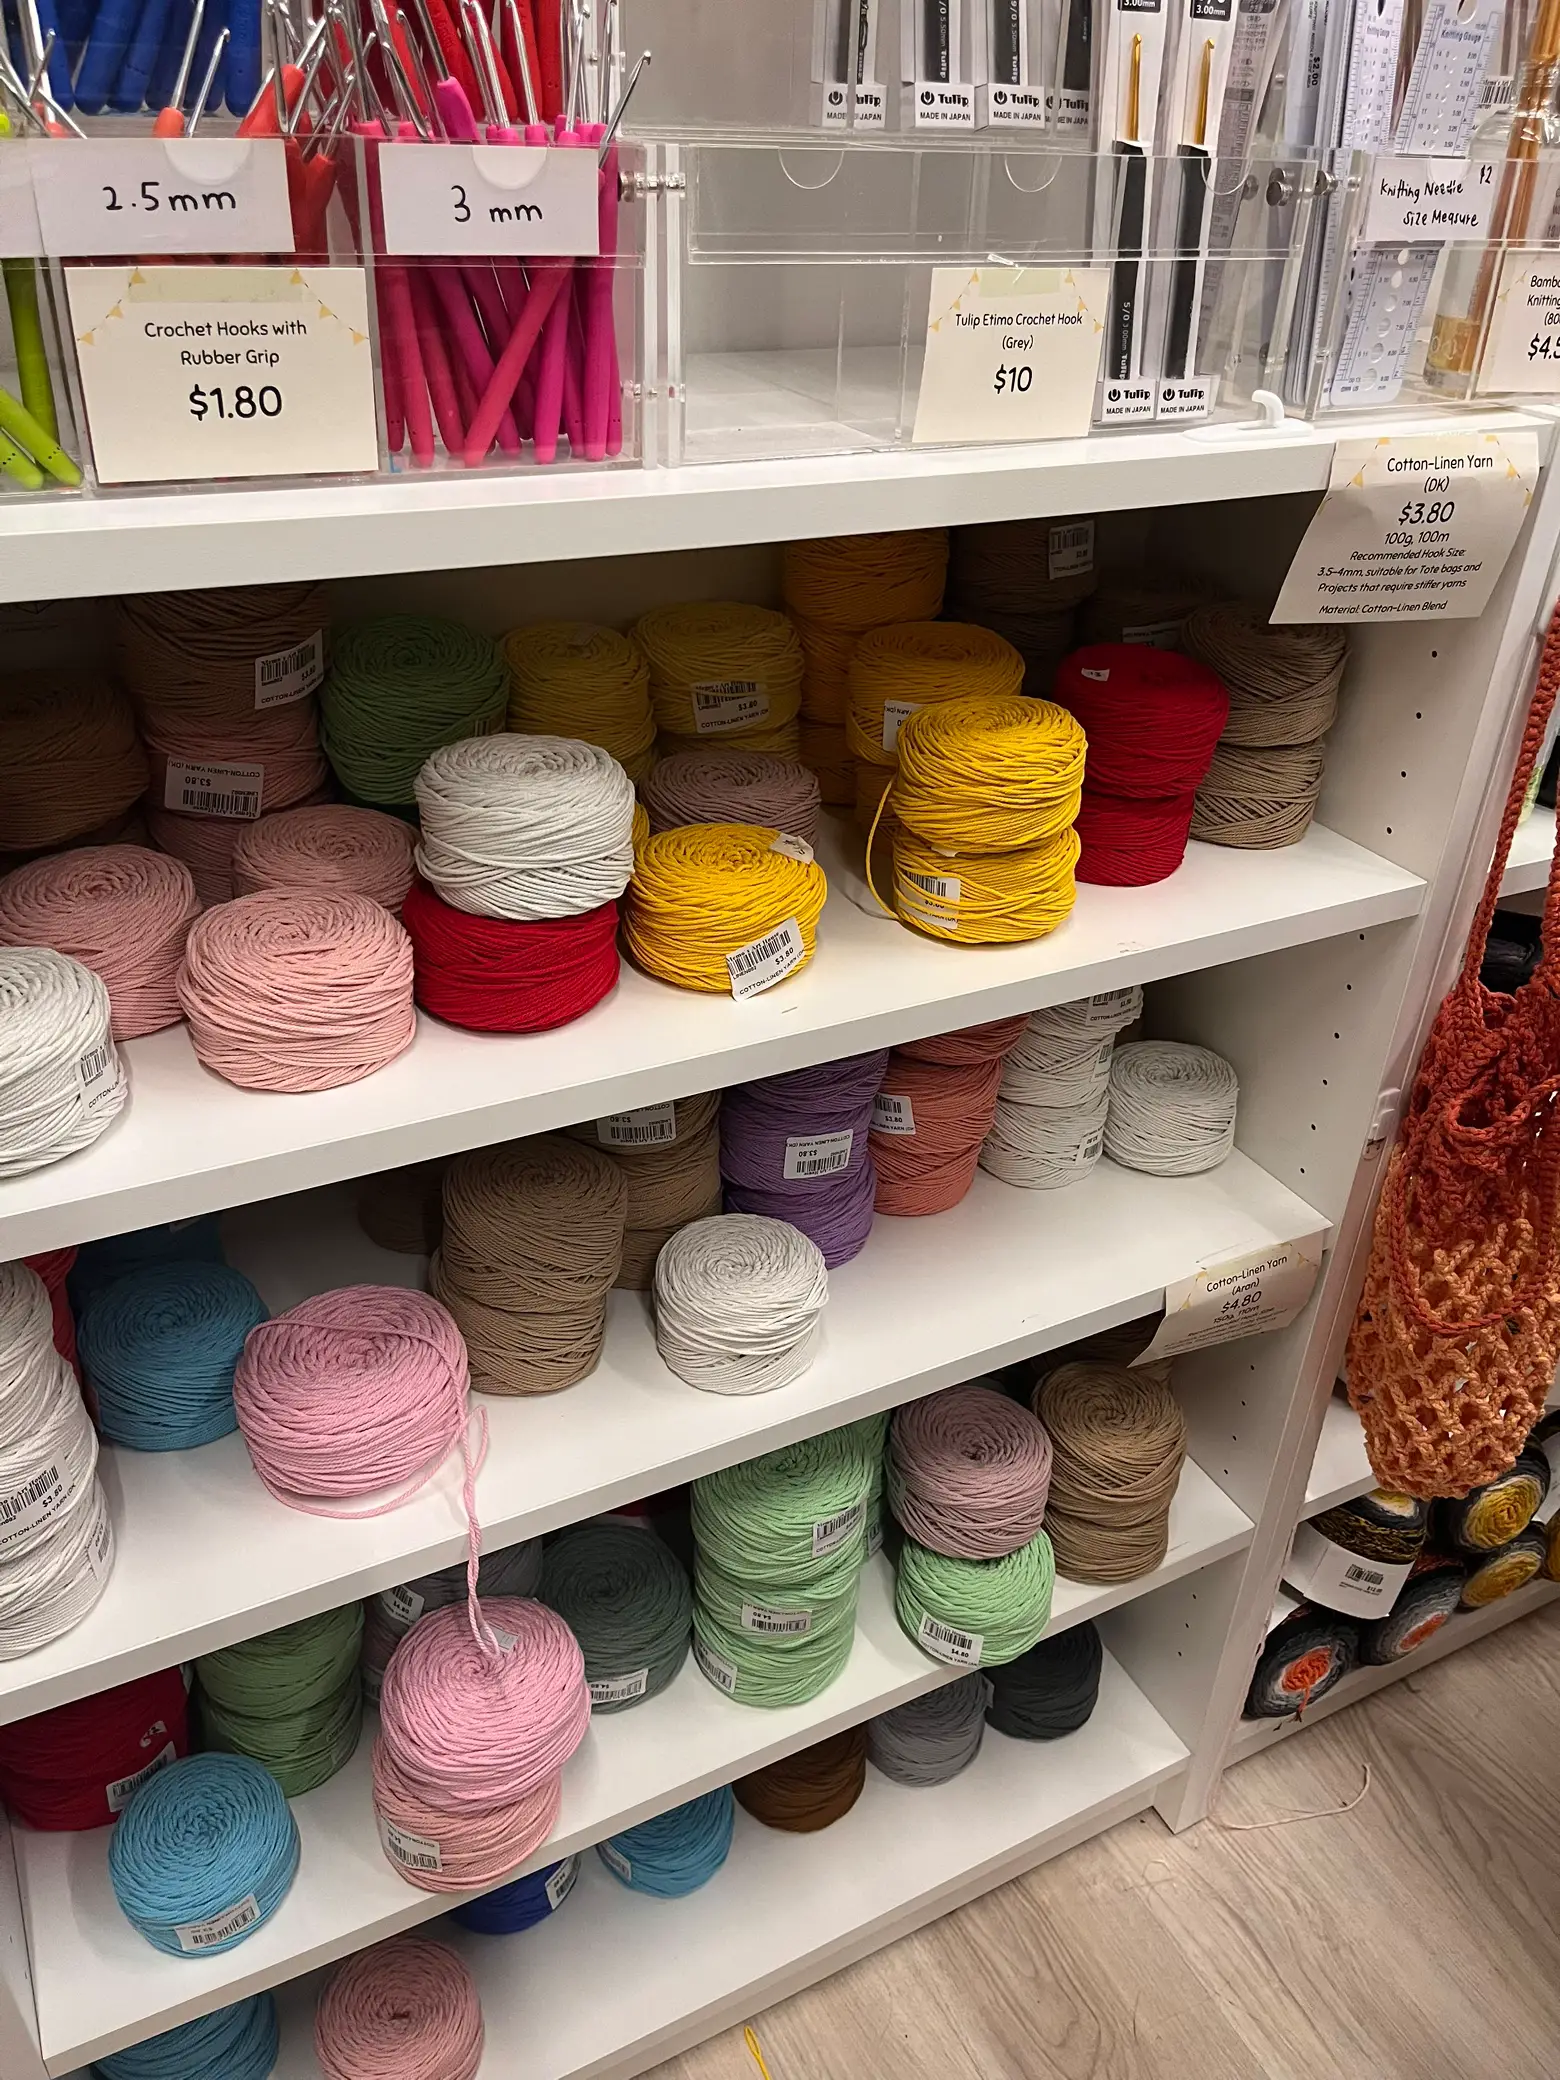 Where Can I Buy Yarn in Singapore - Lemon8 Search